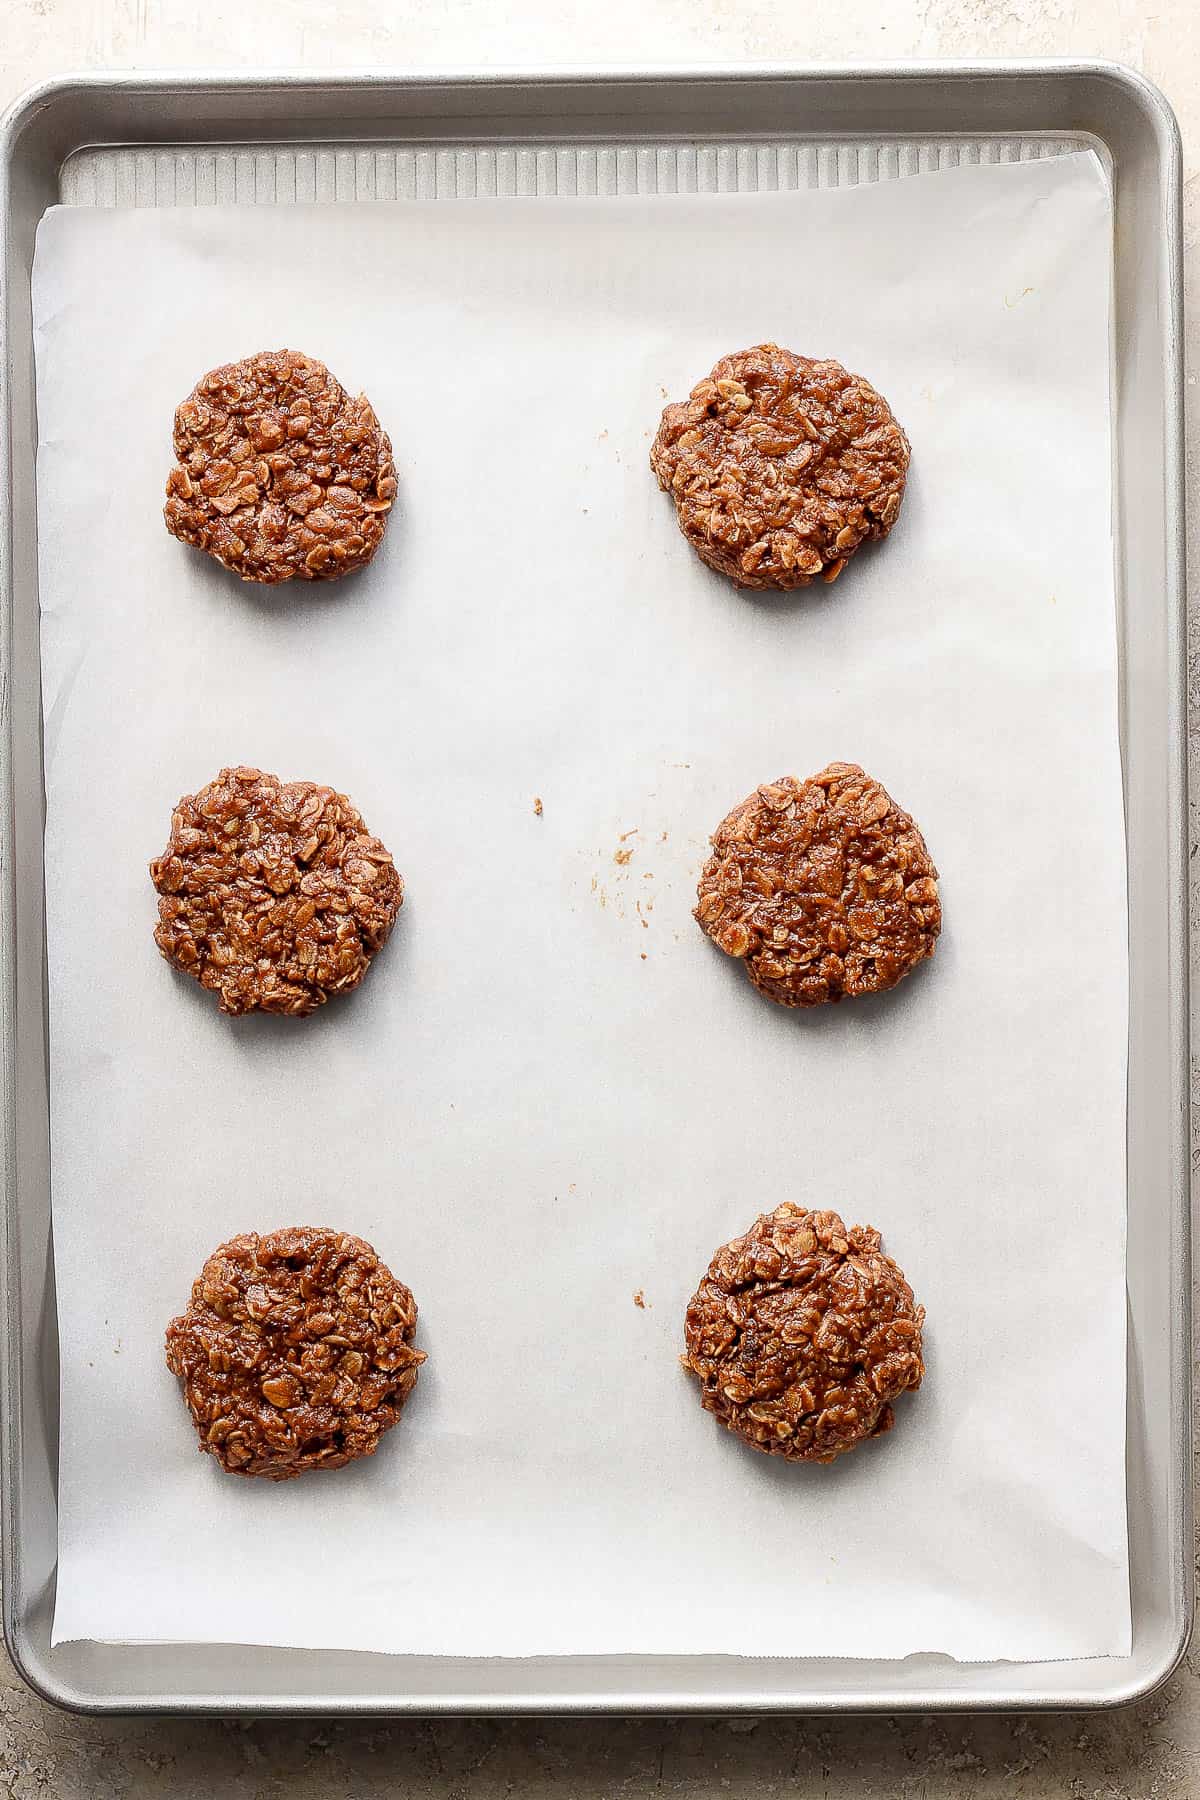 Six no bake cookies on a wax paper lined baking sheet.